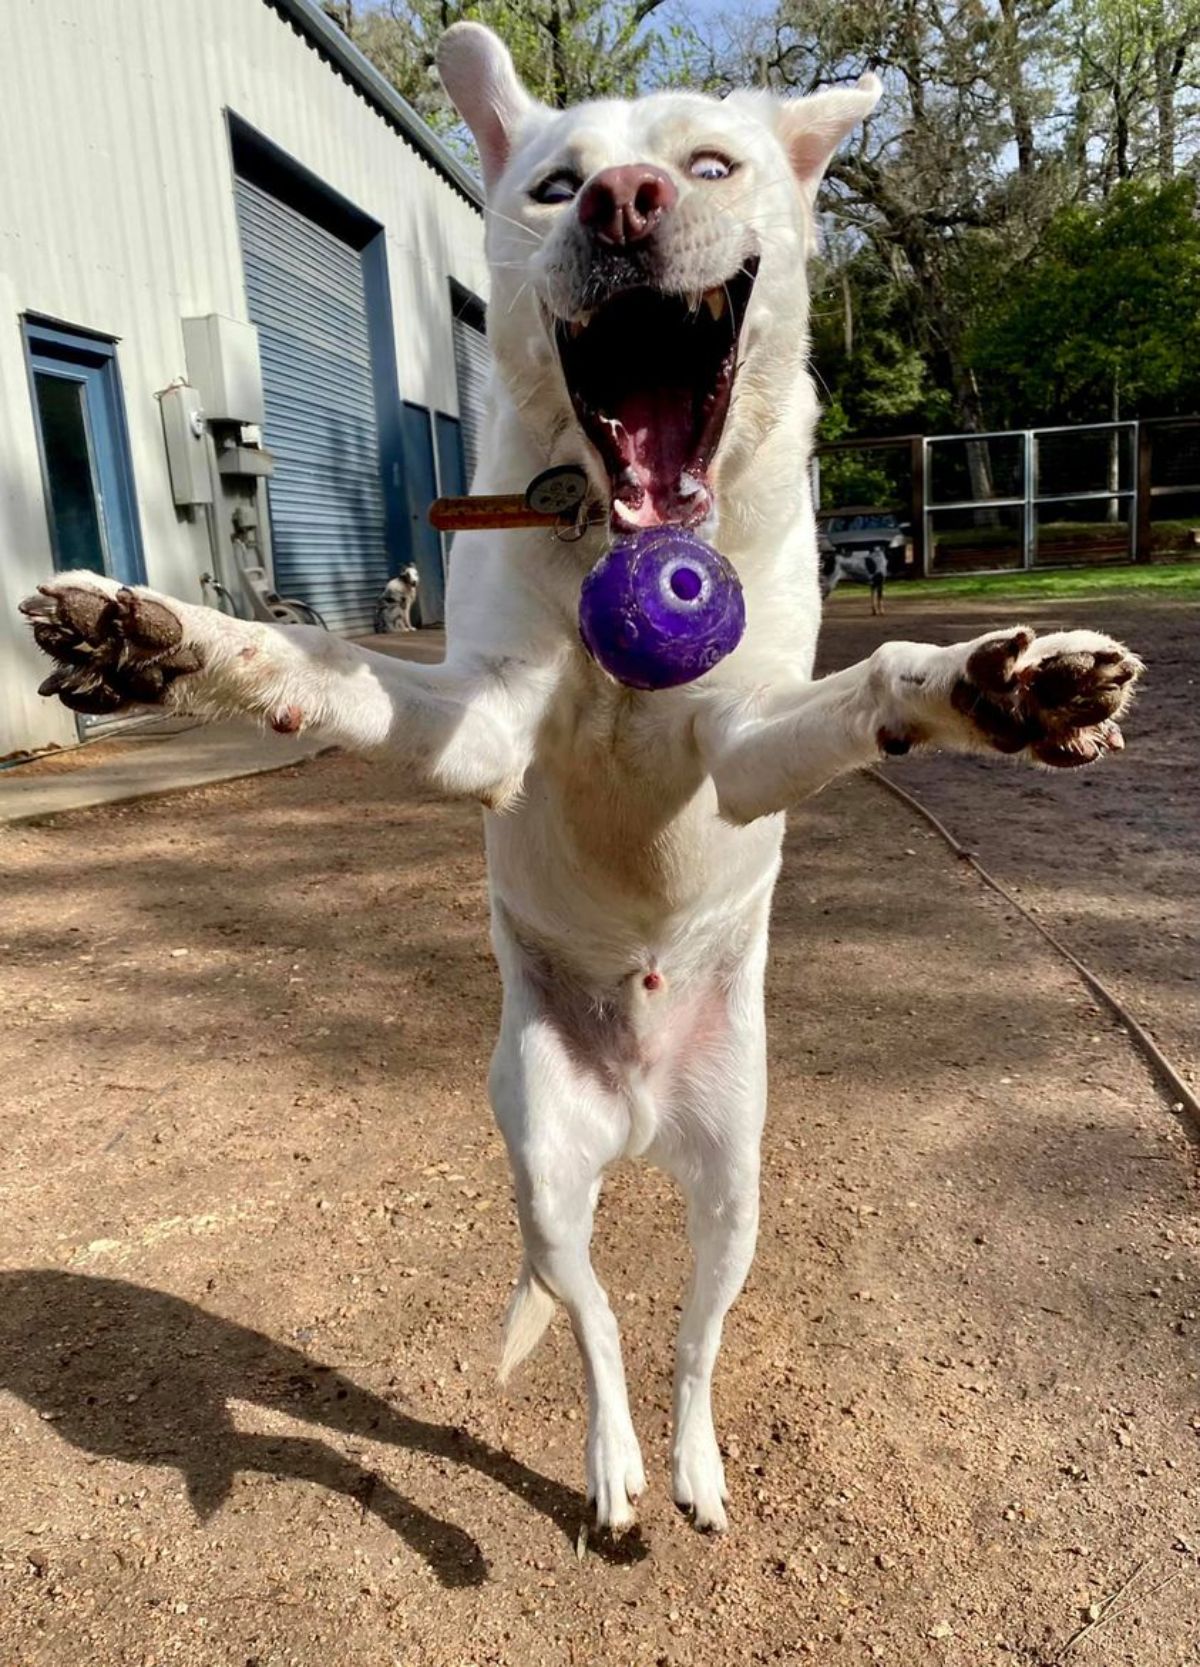 white dog jumping to catch a purple ball in front of it with its mouth fully open and the front legs reaching forward